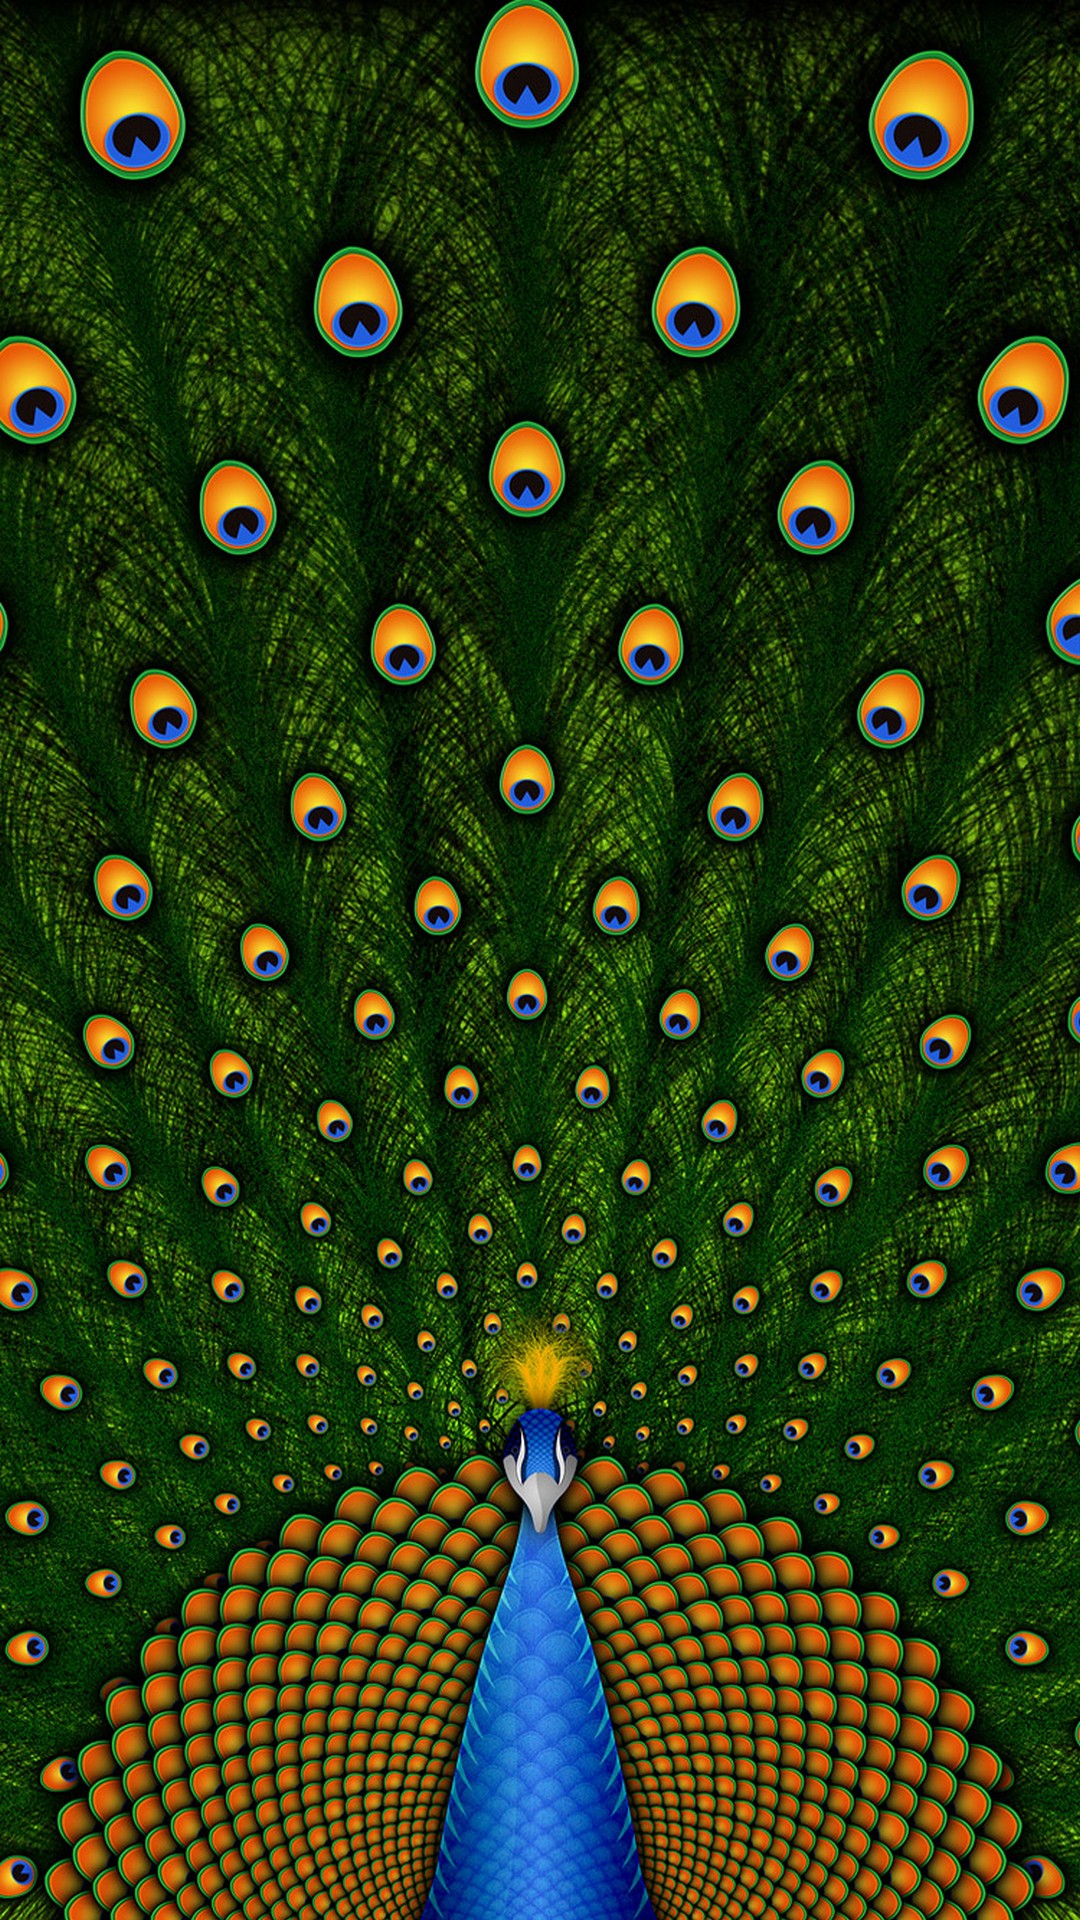 Peacock Cute Girly Wallpaper For Iphone - Latest Wallpaper For Iphone - HD Wallpaper 